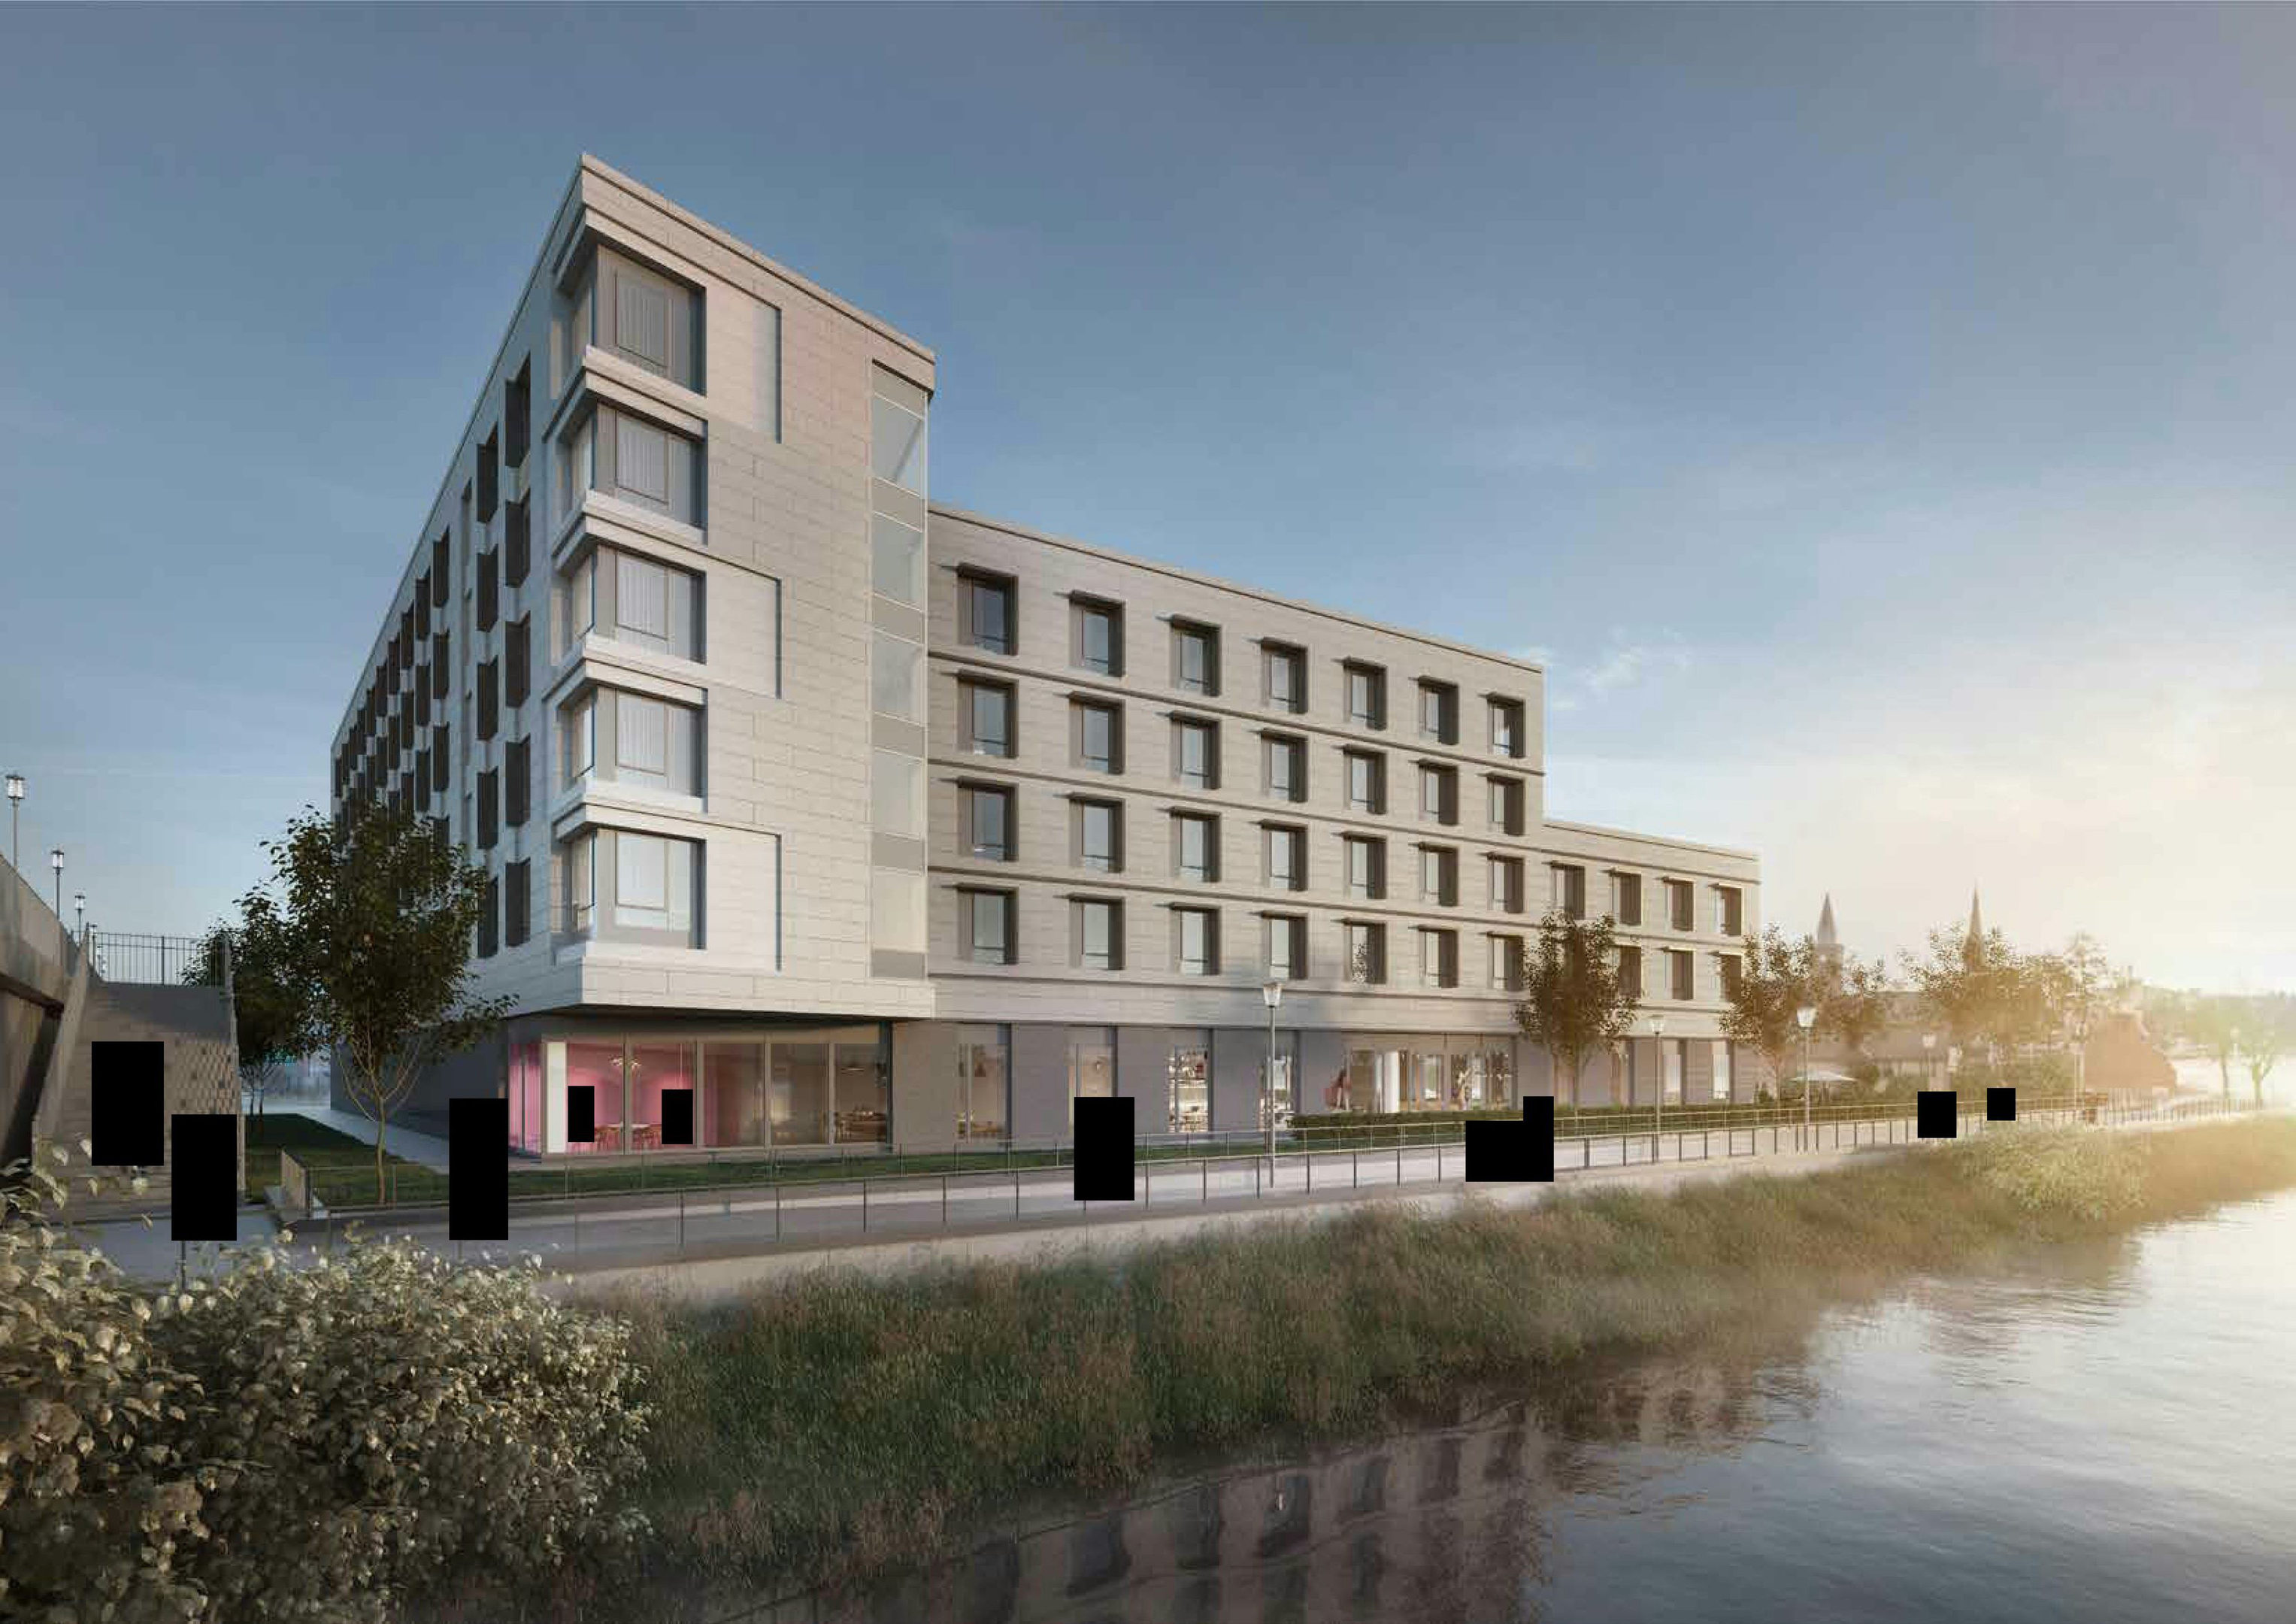 Artist impression of a hotel to be built on Glebe Street in Inverness, on the former swimming pool site.